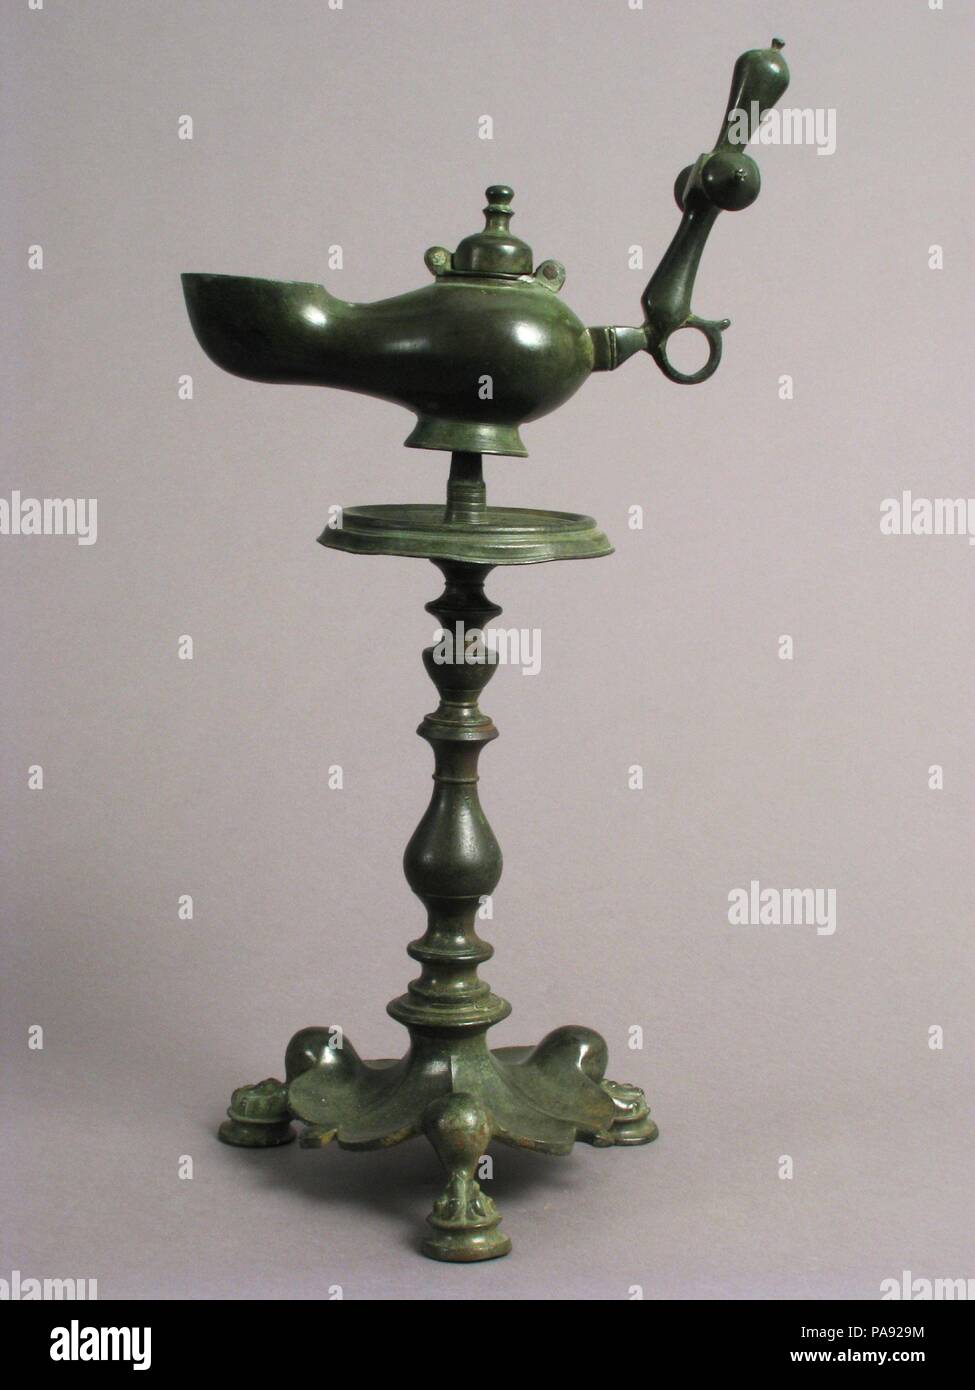 Standing Lamp with a Cross on a Pricket Stand. Culture: Byzantine. Dimensions: Overall: 17 3/16 x 8 3/8 x 6 7/16 in. (43.6 x 21.3 x 16.3 cm)  stand only: 11 11/16 x 6 7/16 in. (29.7 x 16.3 cm)  lamp only: 6 1/8 x 8 3/8 x 3 1/4 in. (15.6 x 21.3 x 8.3 cm). Date: 5th century.  Standing lamps decorated with crosses and supported on footed bases were common in the early Byzantine world. Bishop Theodoret of Cyrrhus in Syria (d. ca. 466) described Saint Symeon Stylites, who lived atop a column, as 'this dazzling lamp, [who] as if placed on a lampstand, has sent out rays in all directions likes the su Stock Photo